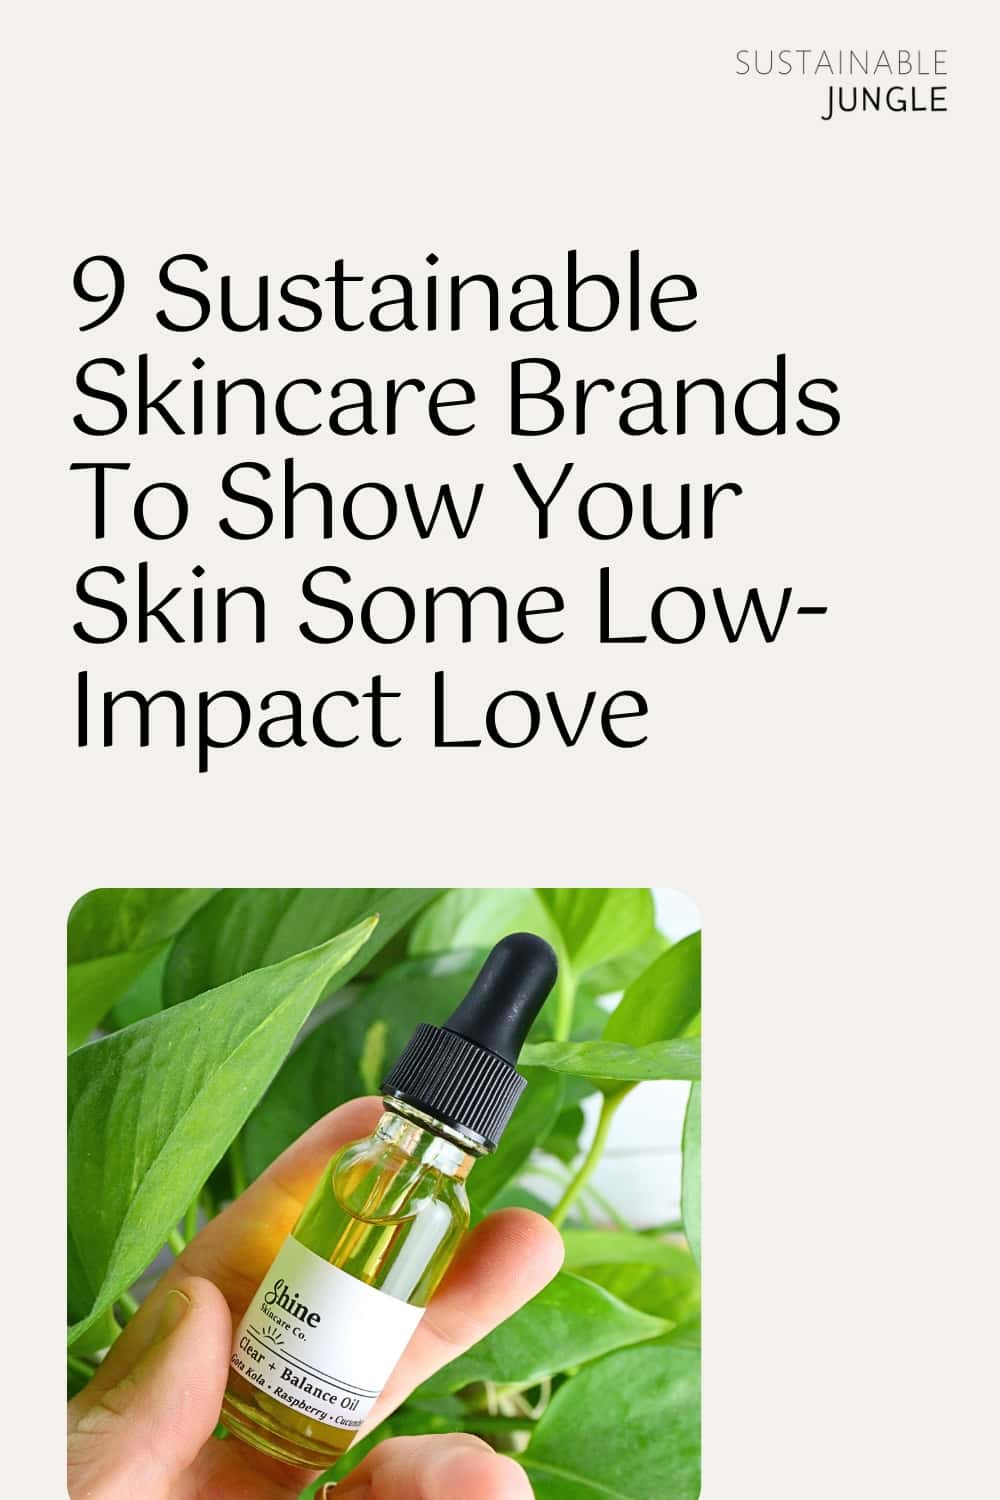 9 Sustainable Skincare Brands To Show Your Skin Some Low-Impact Love Image by Sustainable Jungle #sustainableskincare #sustainableskincarebrands #ecofriendlyskincare #ecofriendlyskincareproducts #sustainableskincareproducts #ecoskincare #sustainablejungle